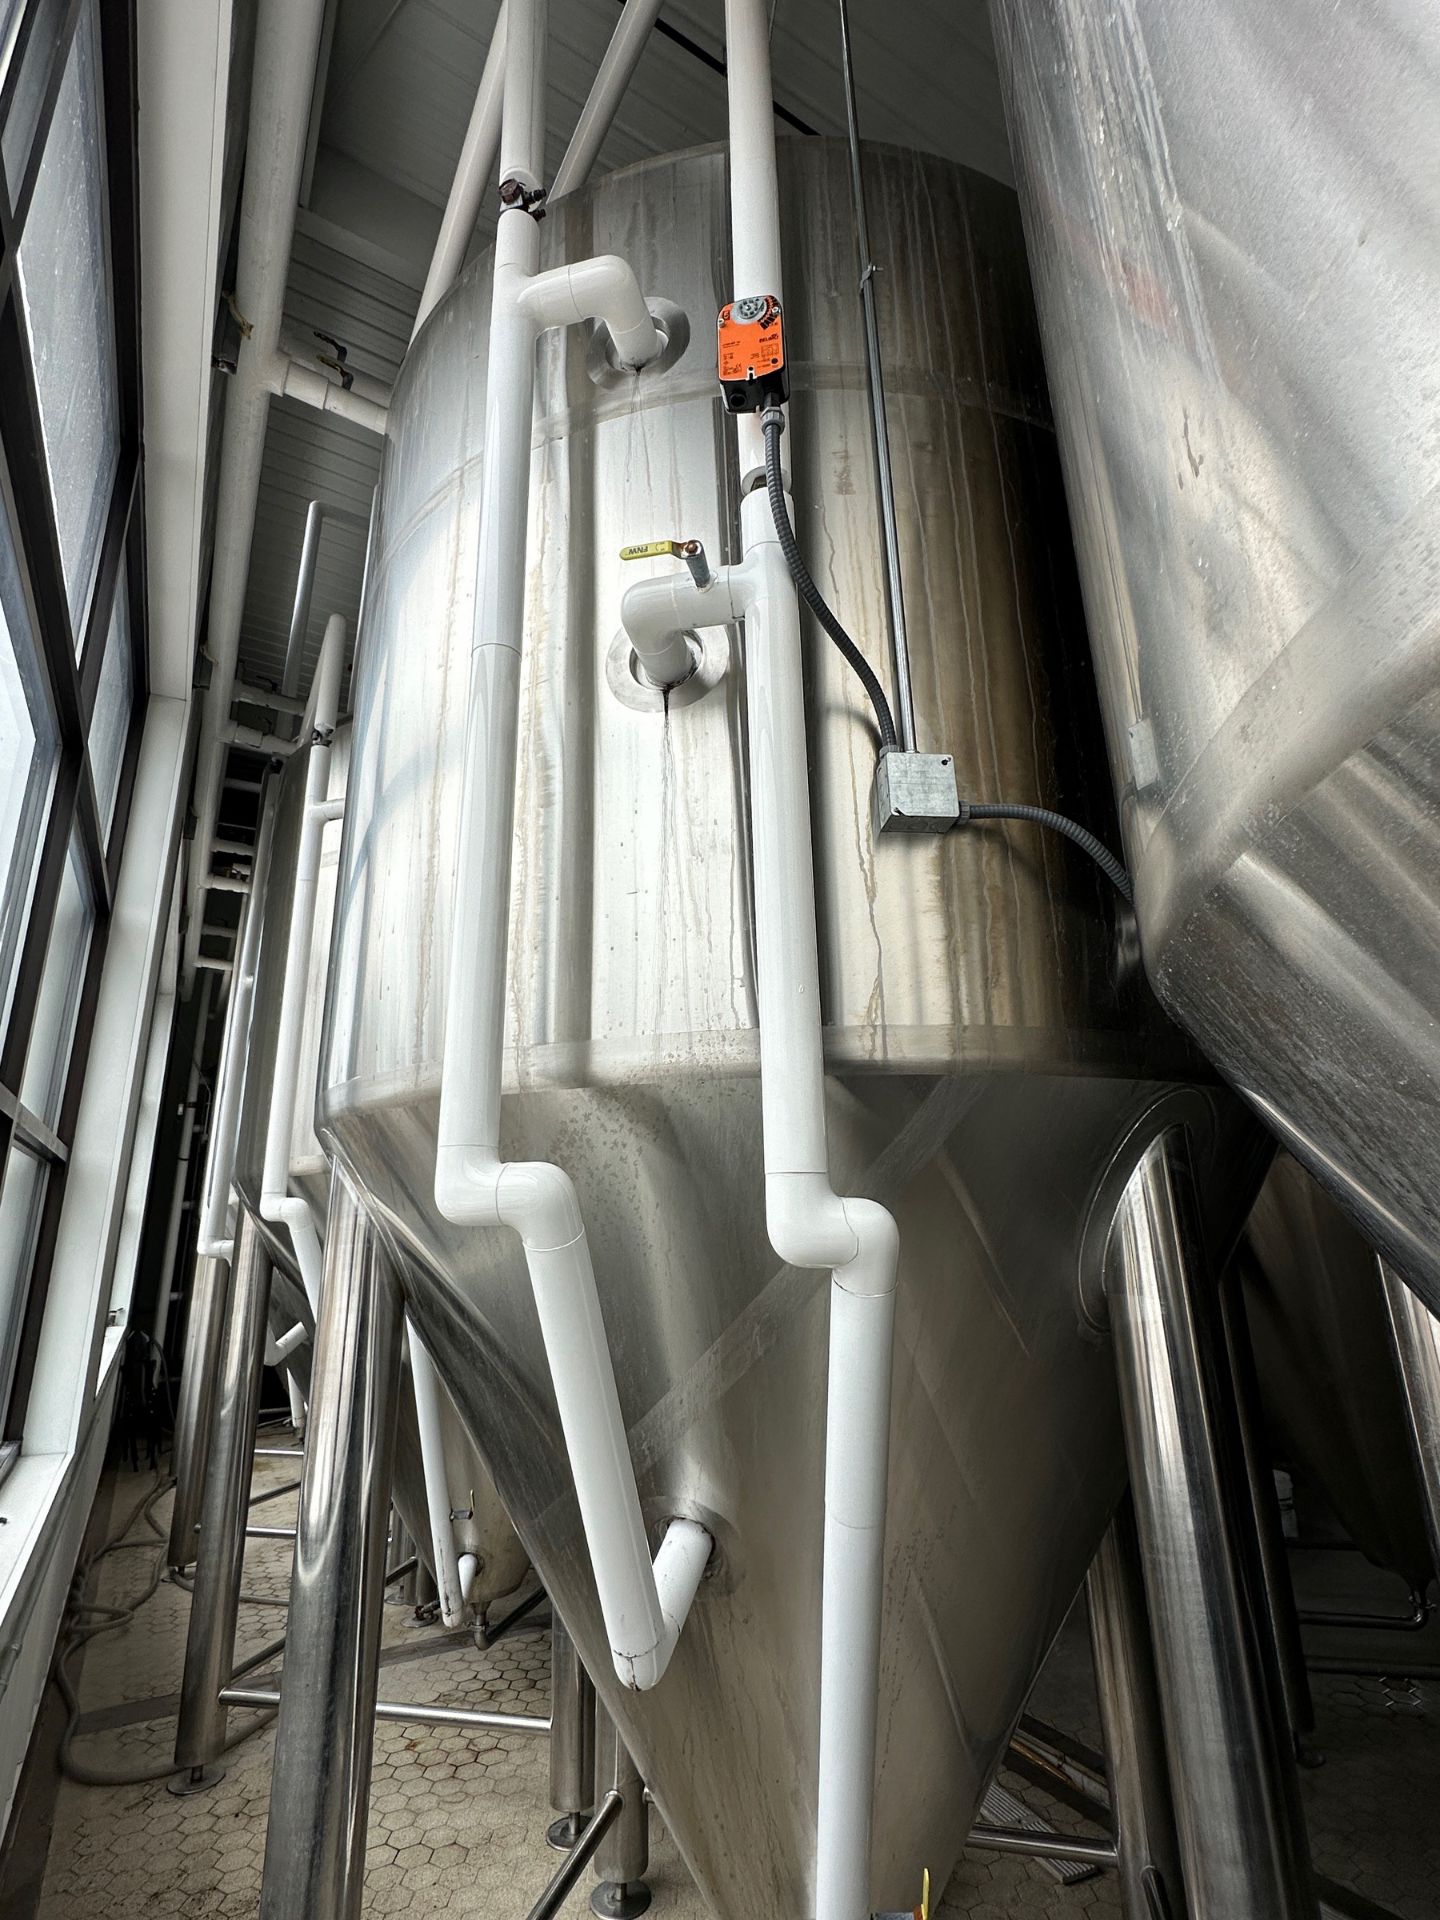 DME 60 BBL Stainless Steel Fermentation Tank - Cone Bottom, Glycol Jacketed, Mandoor, Zwickel Valve, - Image 3 of 4